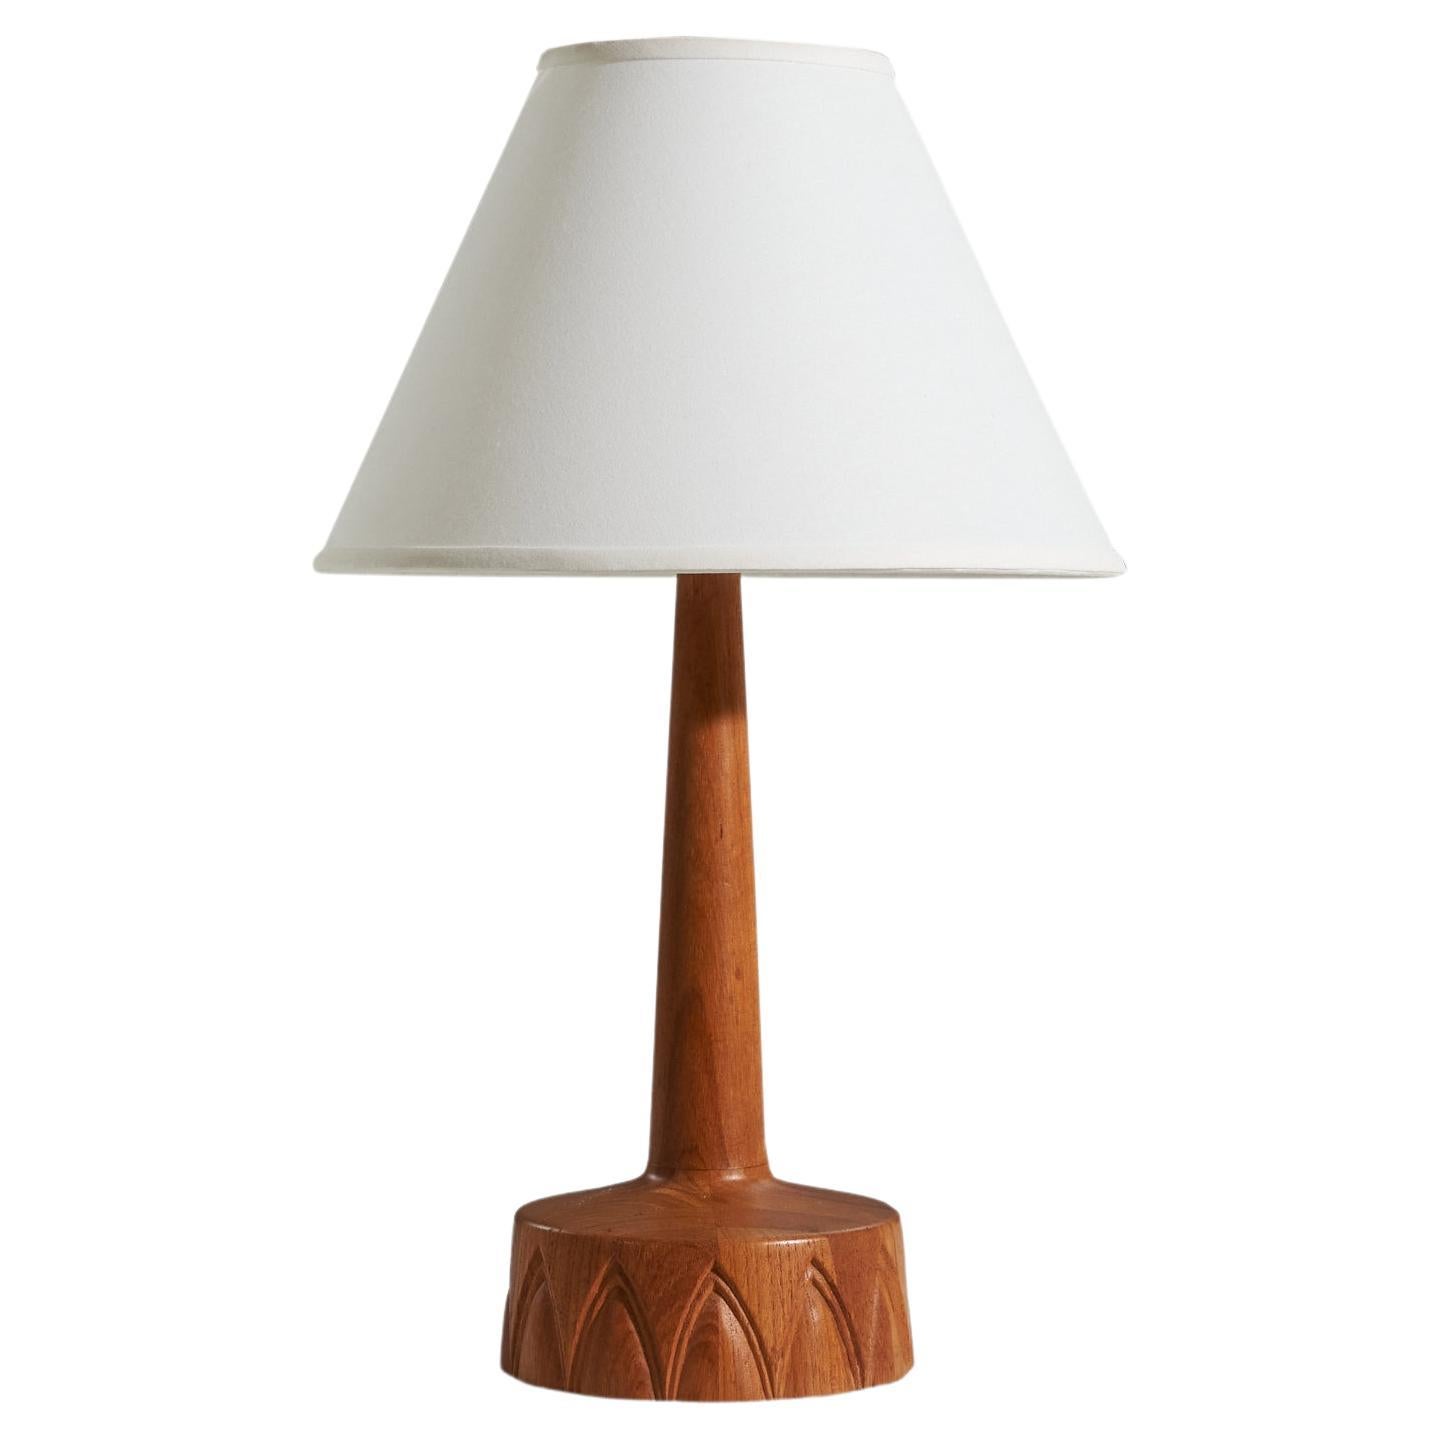 Swedish Table Lamp, Teak and Brass, Sweden, 1960s For Sale